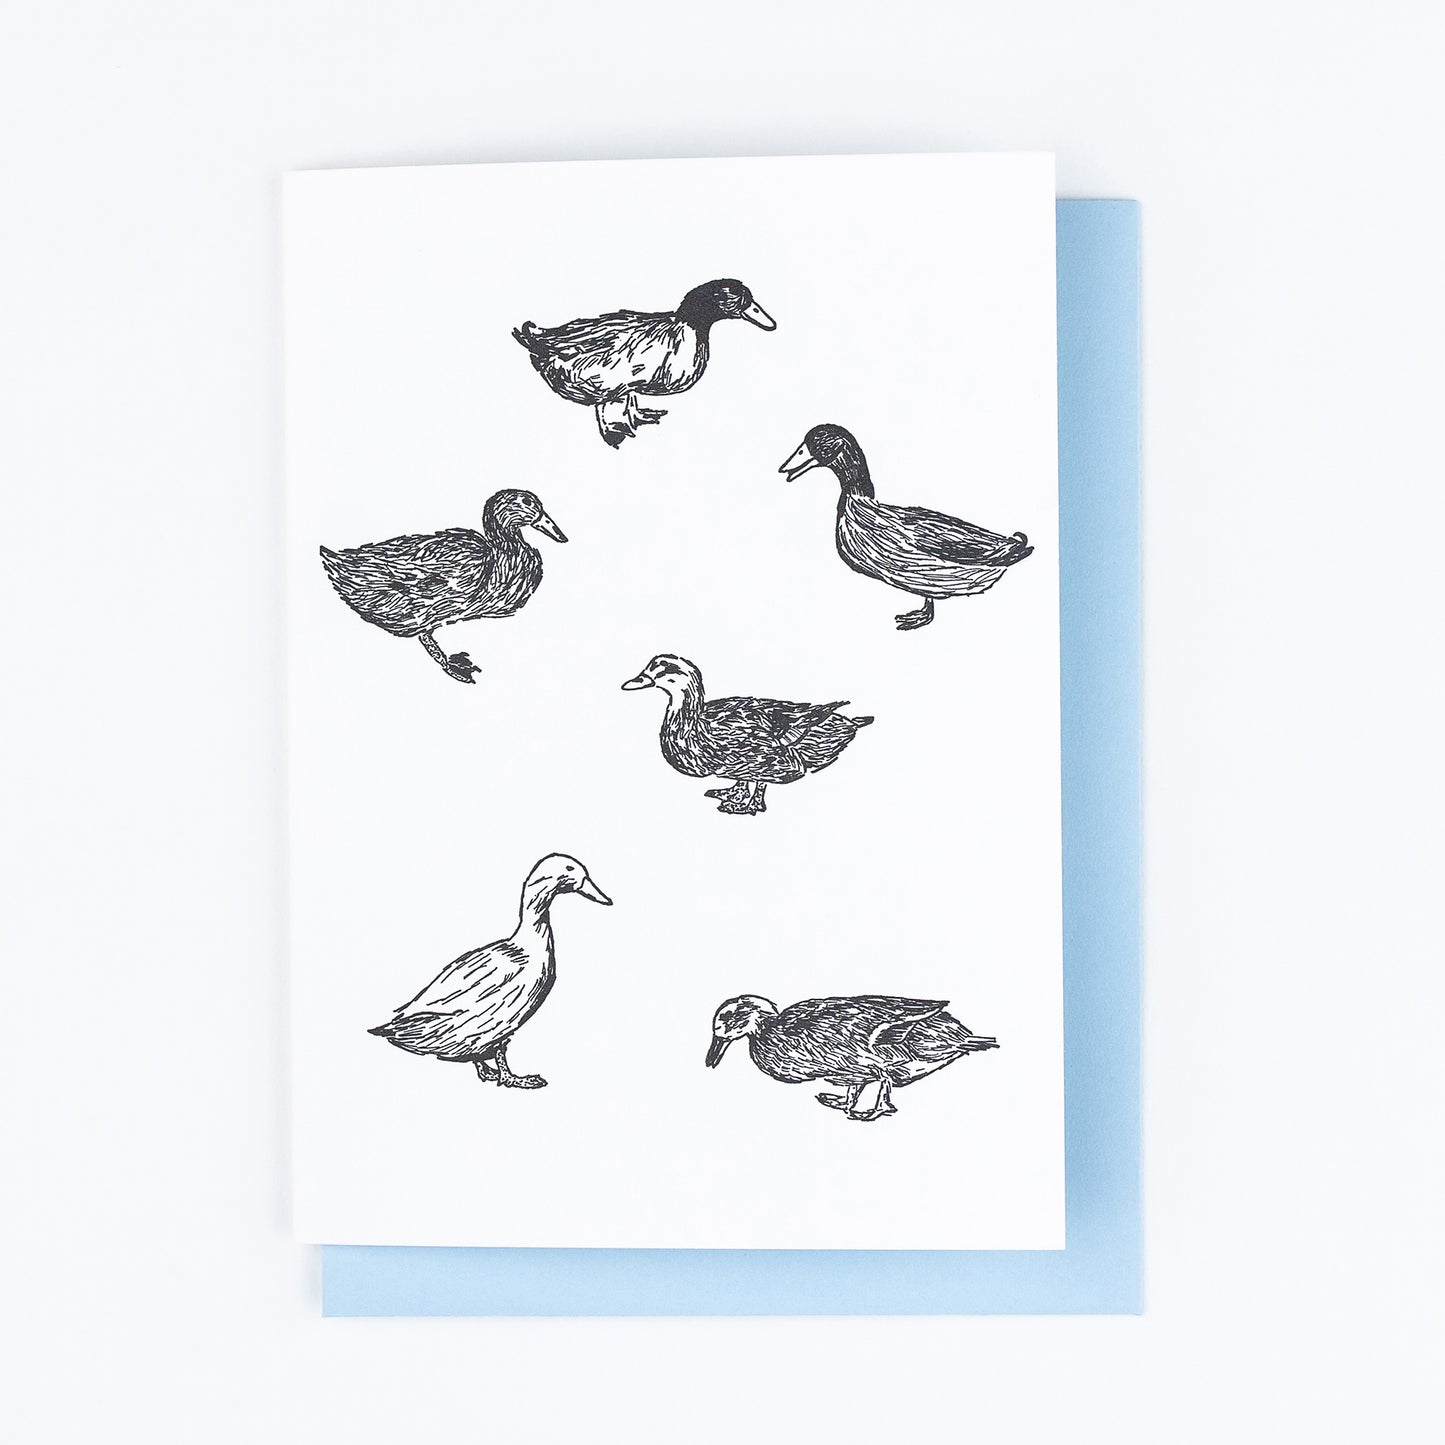 Letterpress greeting card featuring six hand-drawn backyard ducks, printed in a rich black ink. There is no text on the card. The white card is 100% cotton, blank inside, and is paired with a light blue envelope.